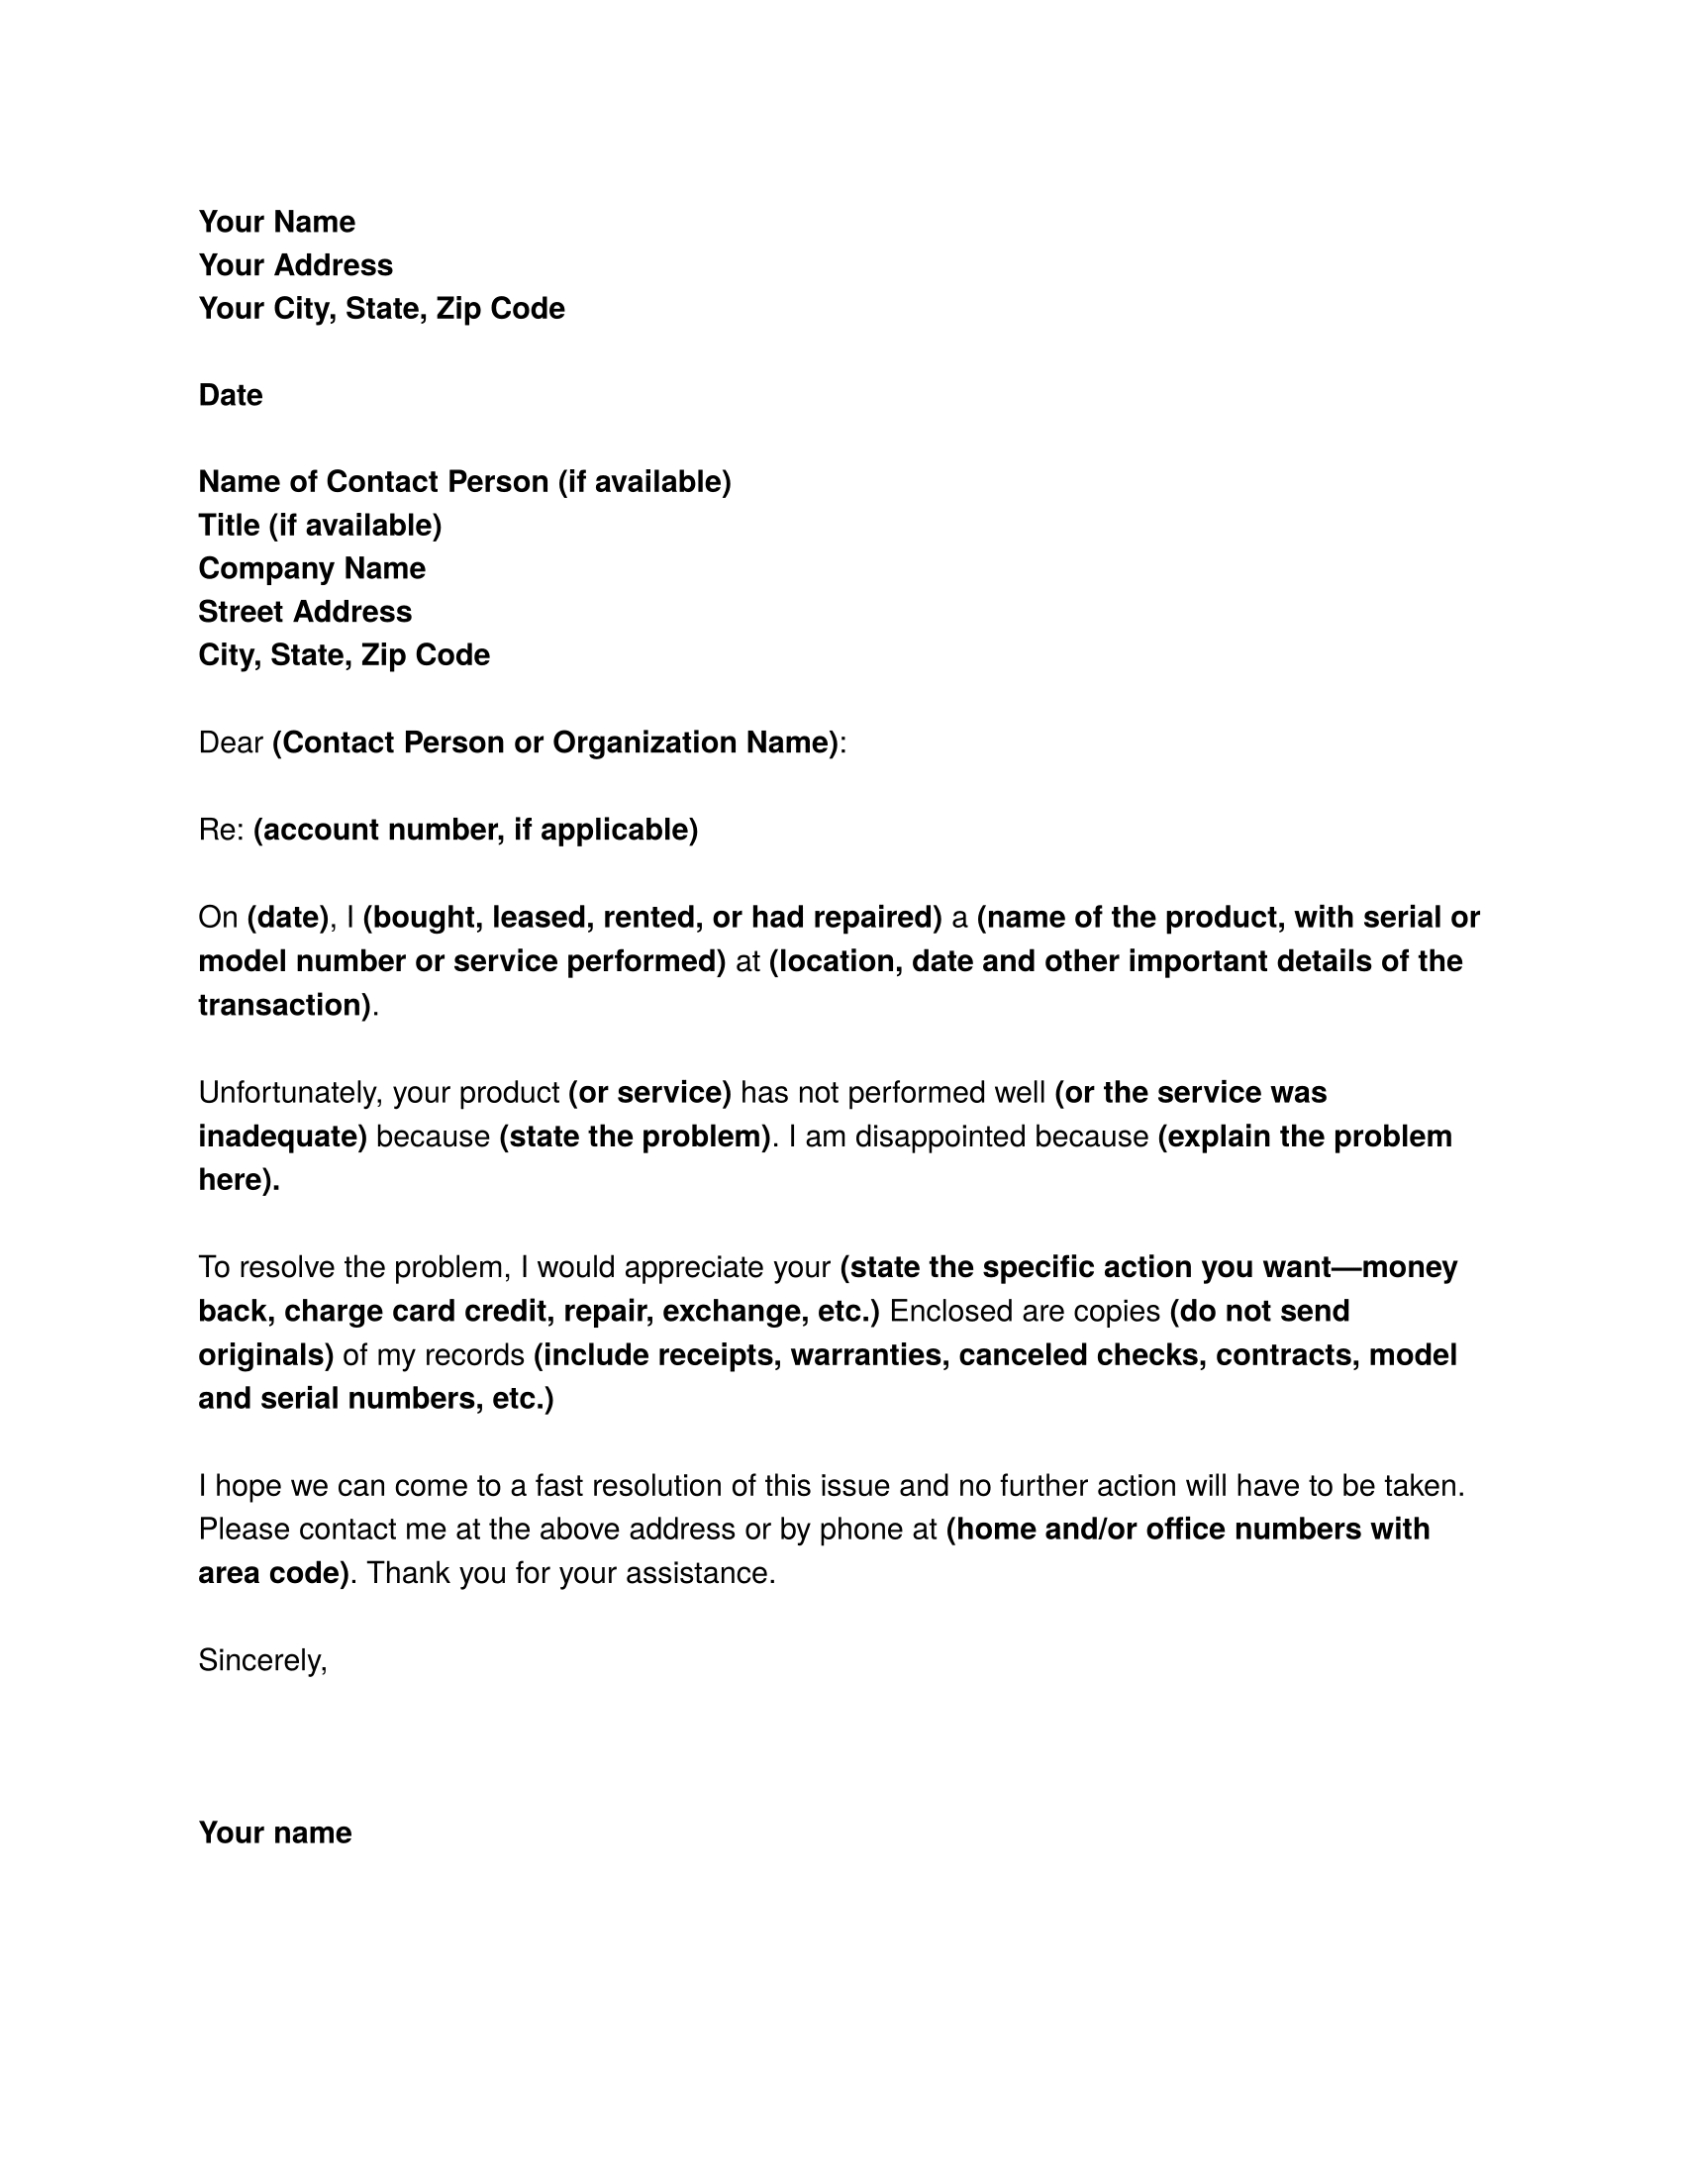 Complaint Letter Sample - Download Free Business Letter Templates And Forms Throughout Formal Letter Of Complaint To Employer Template